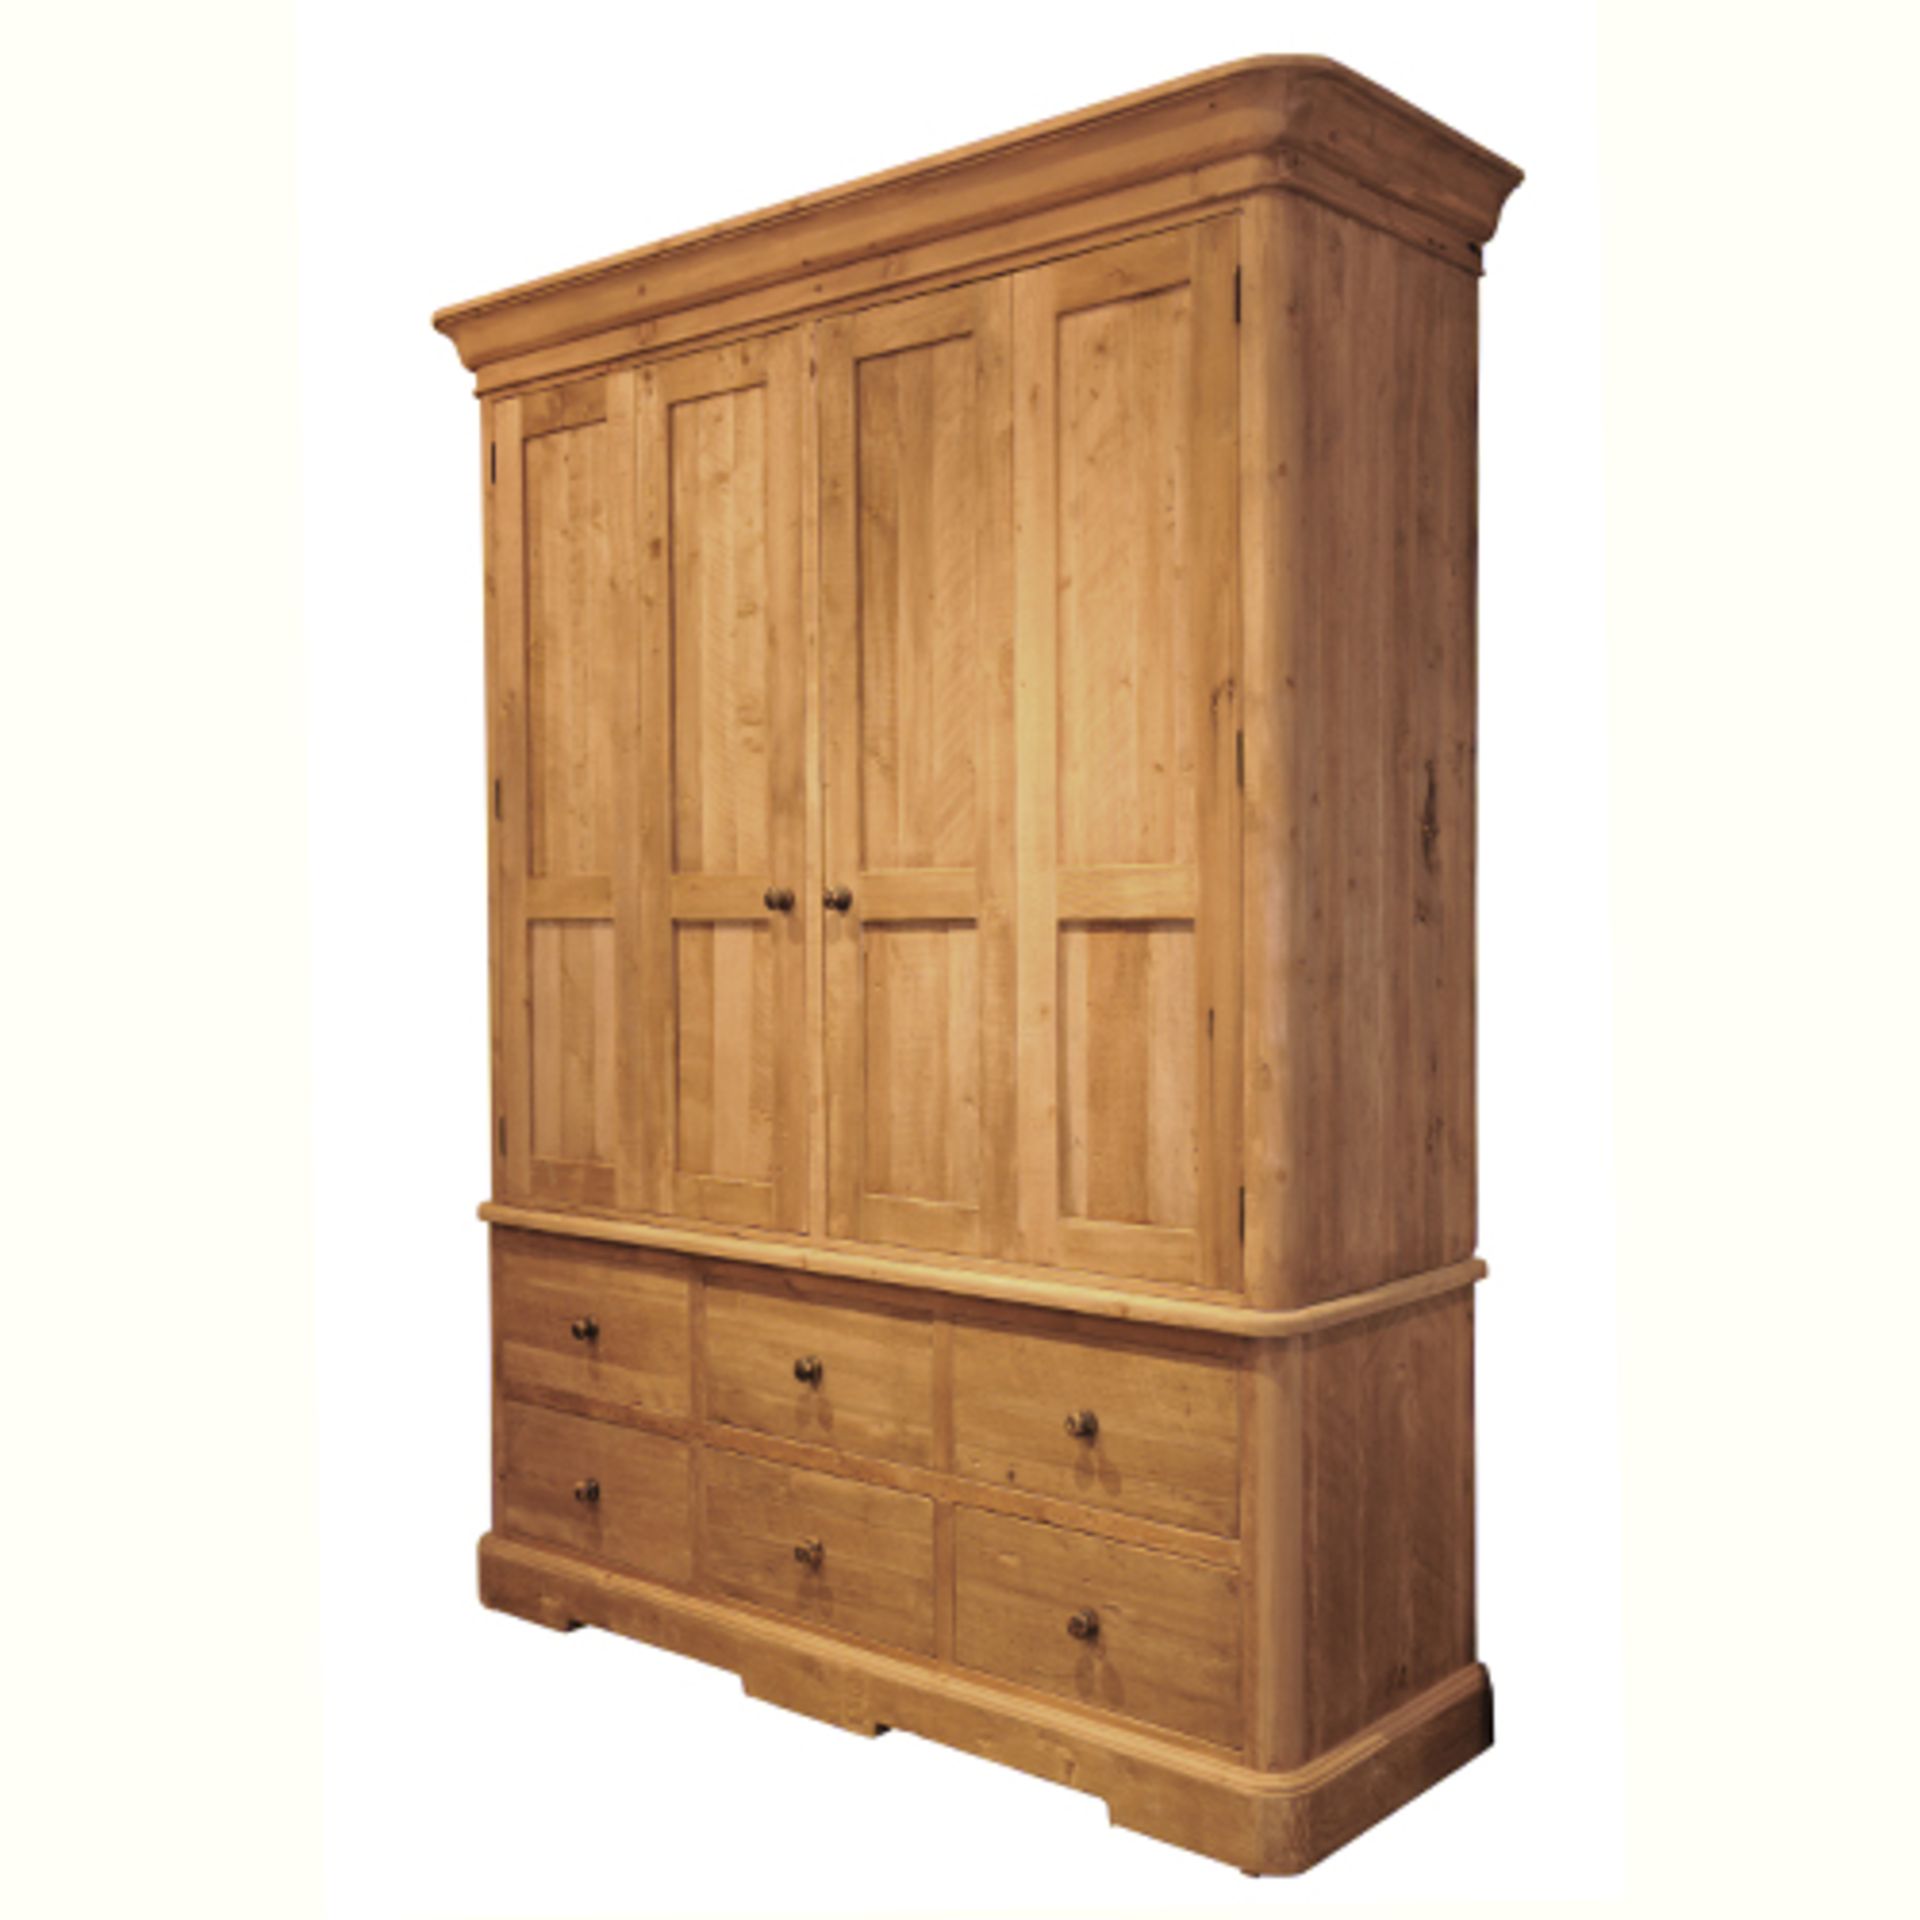 Kitchen Housekeeper Cupboard Genuine English Reclaimed Timber 196 X 68 X 249cm The Traditional